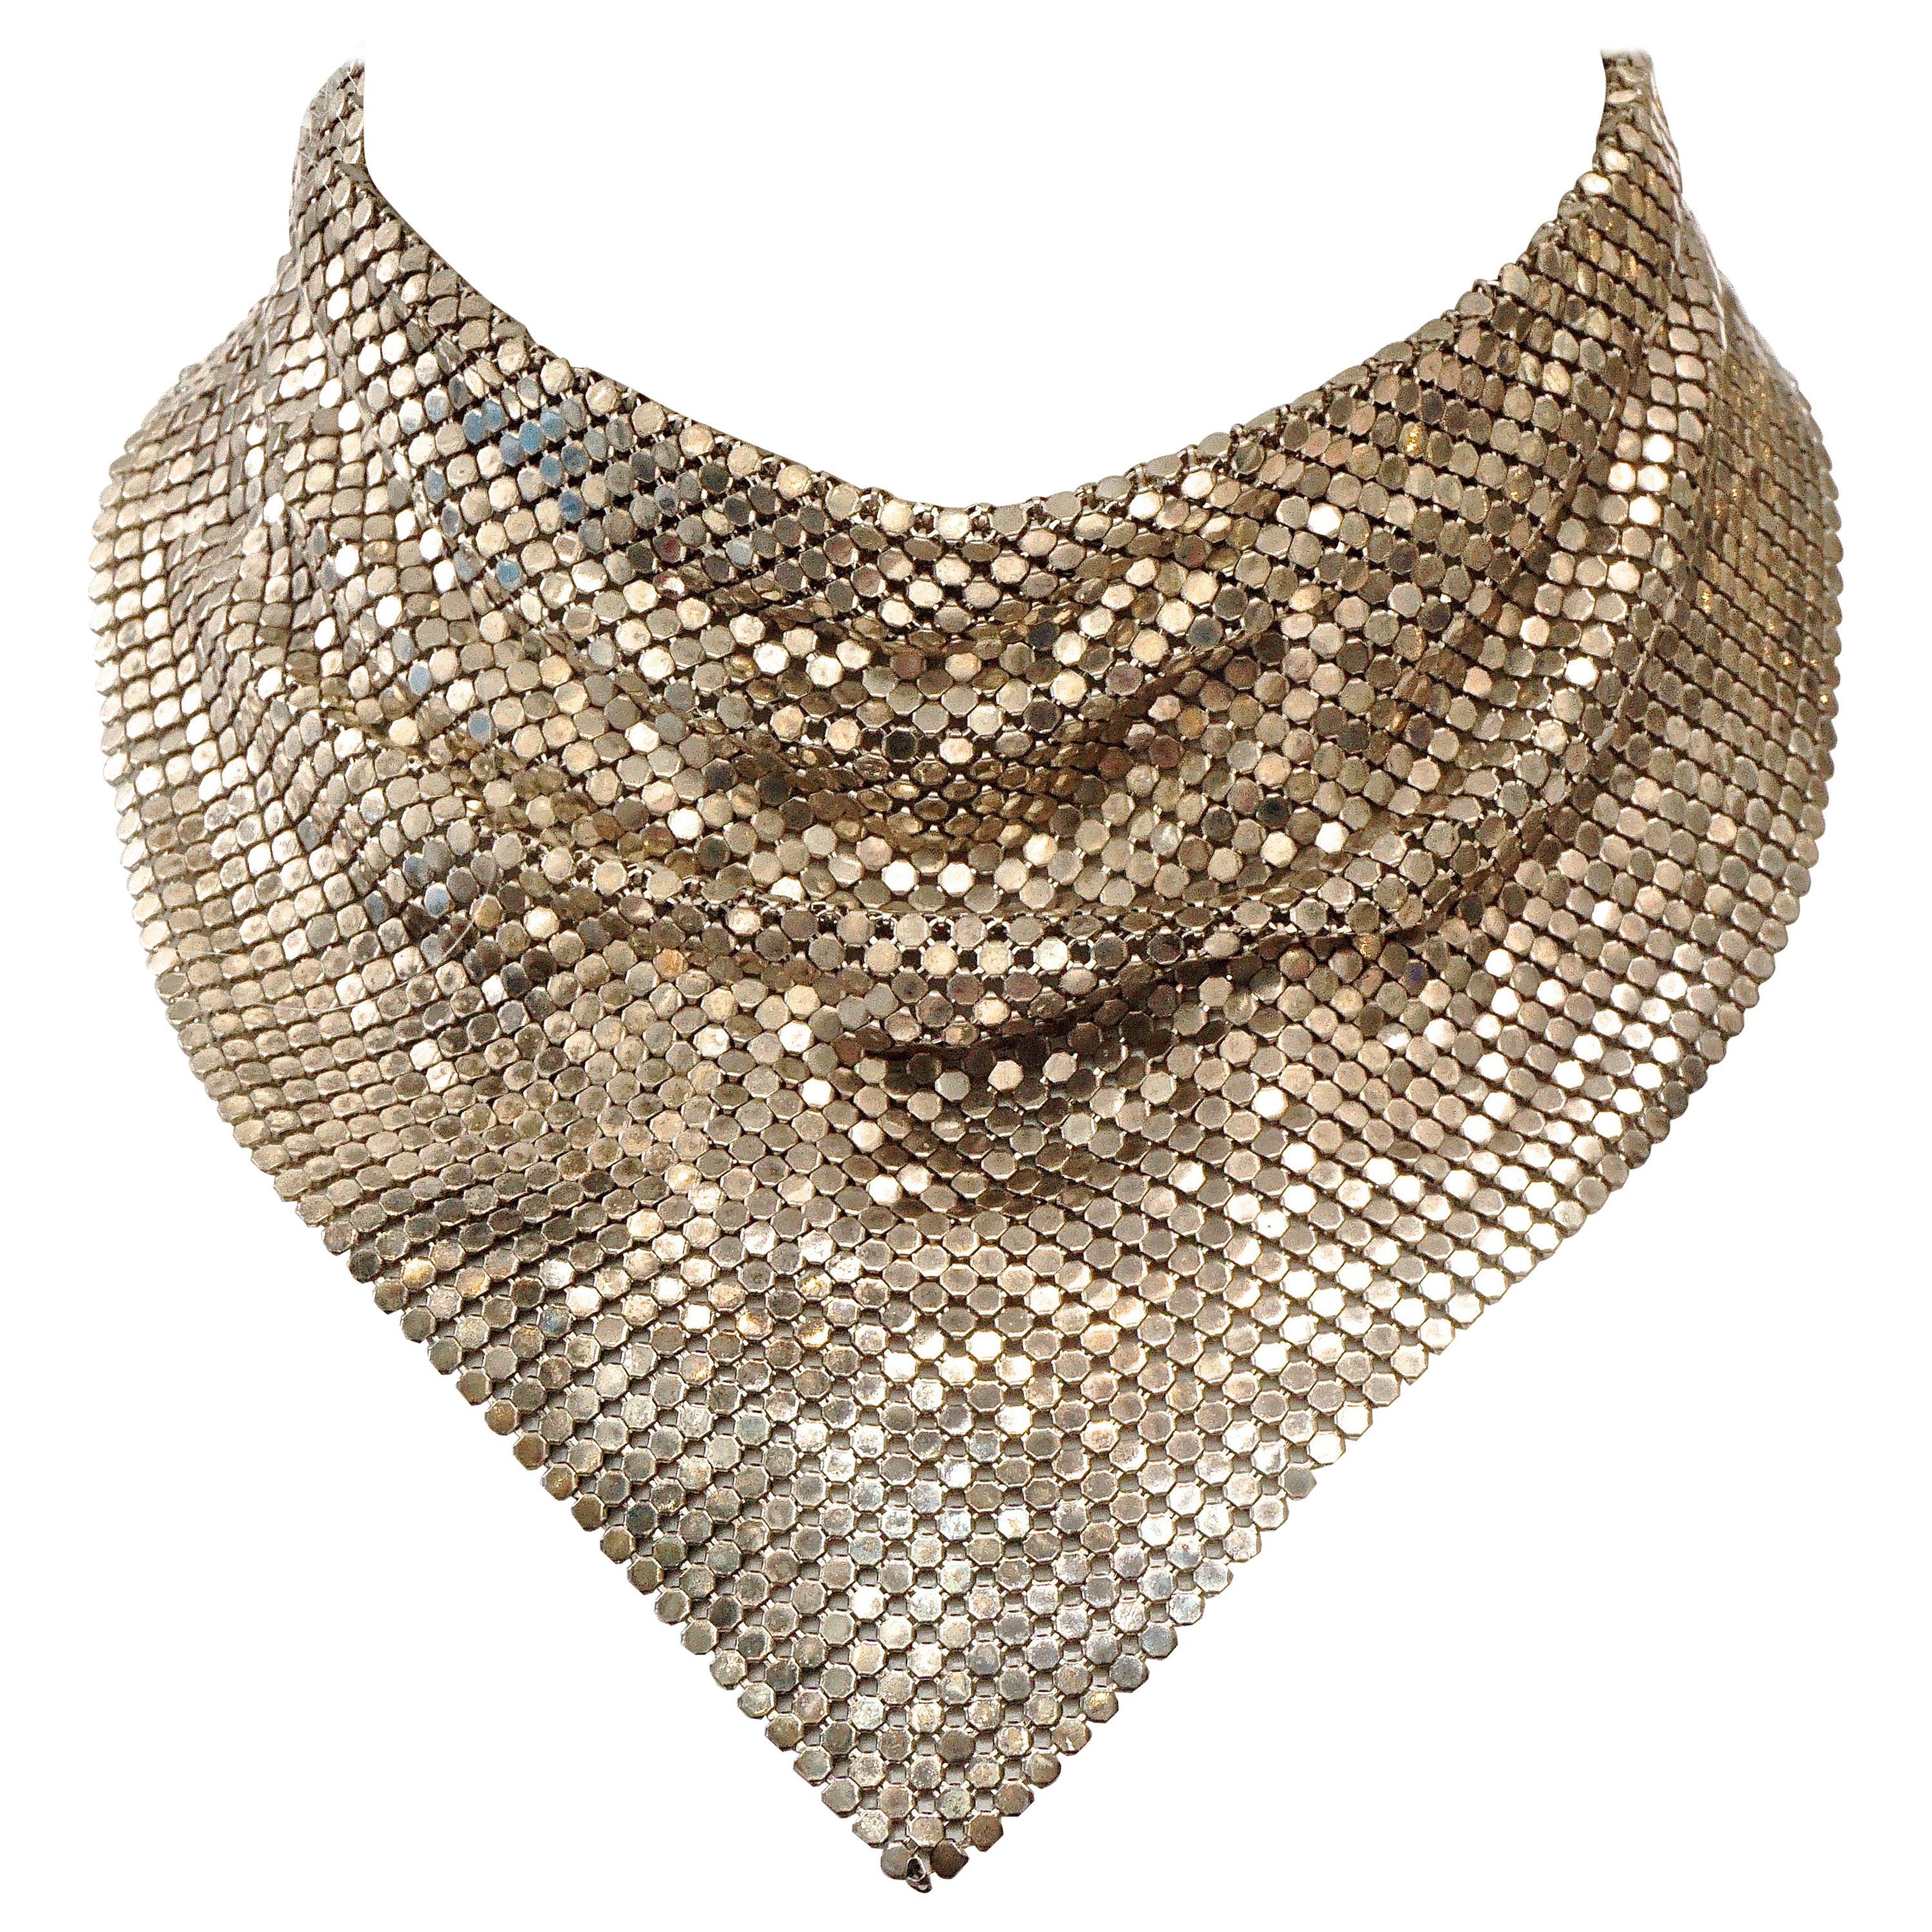 Silver Plated Mesh Chainmail Scarf Necklace circa 1970s